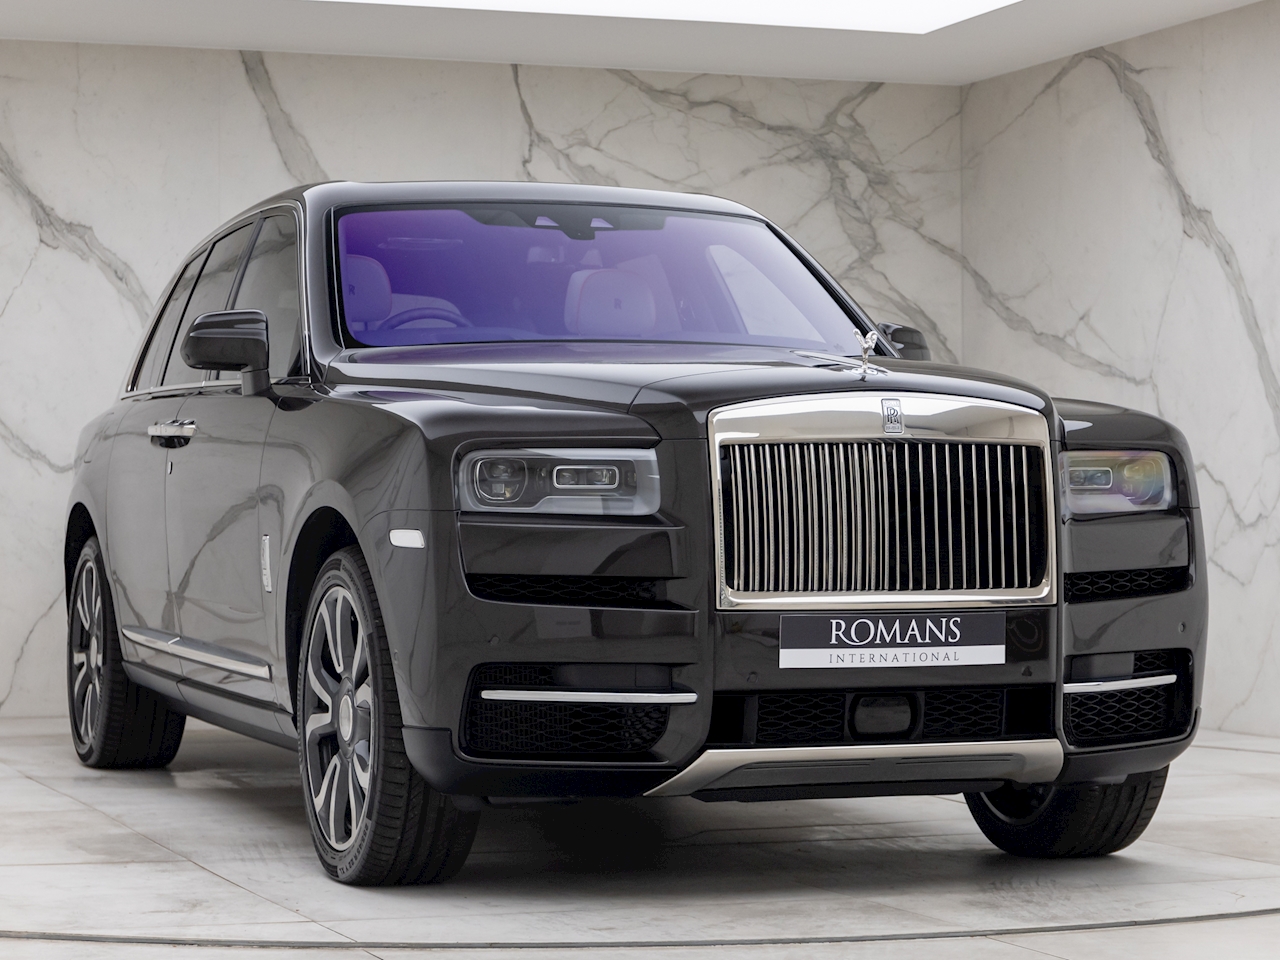 Used 2019 RollsRoyce Cullinan For Sale Sold  Exclusive Automotive Group  Stock C114337